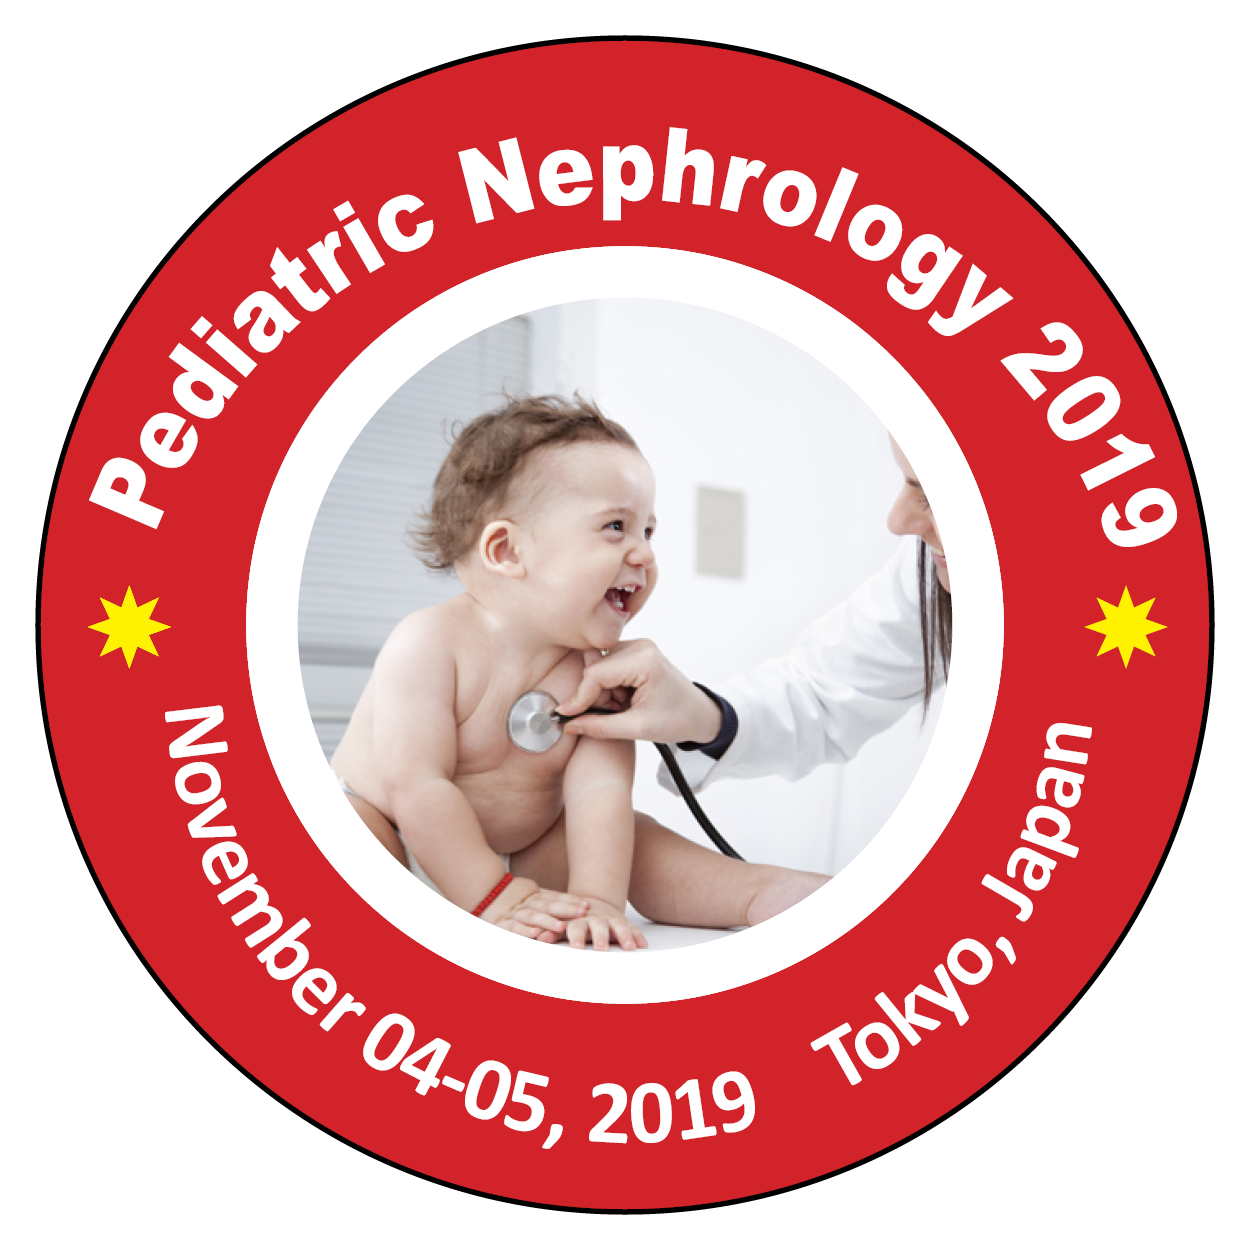 Annual Conference on Pediatric Urology and Nephrology Care